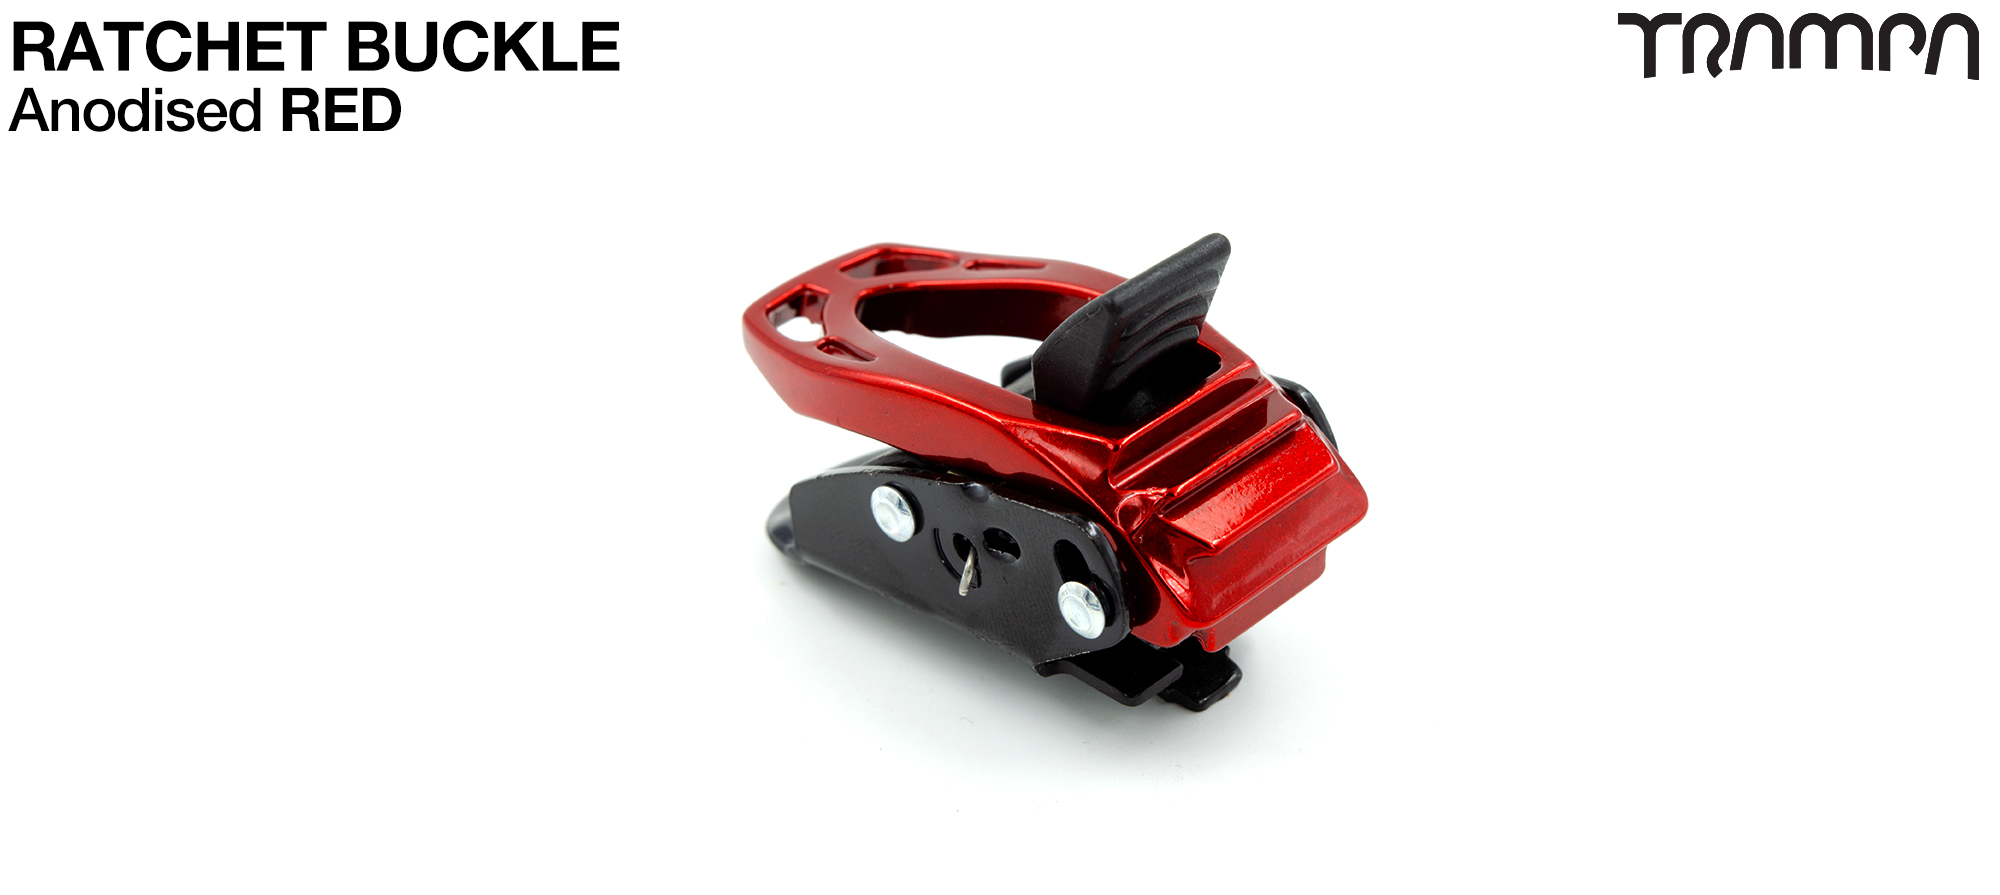 RED Anodised Ratchet Buckle 